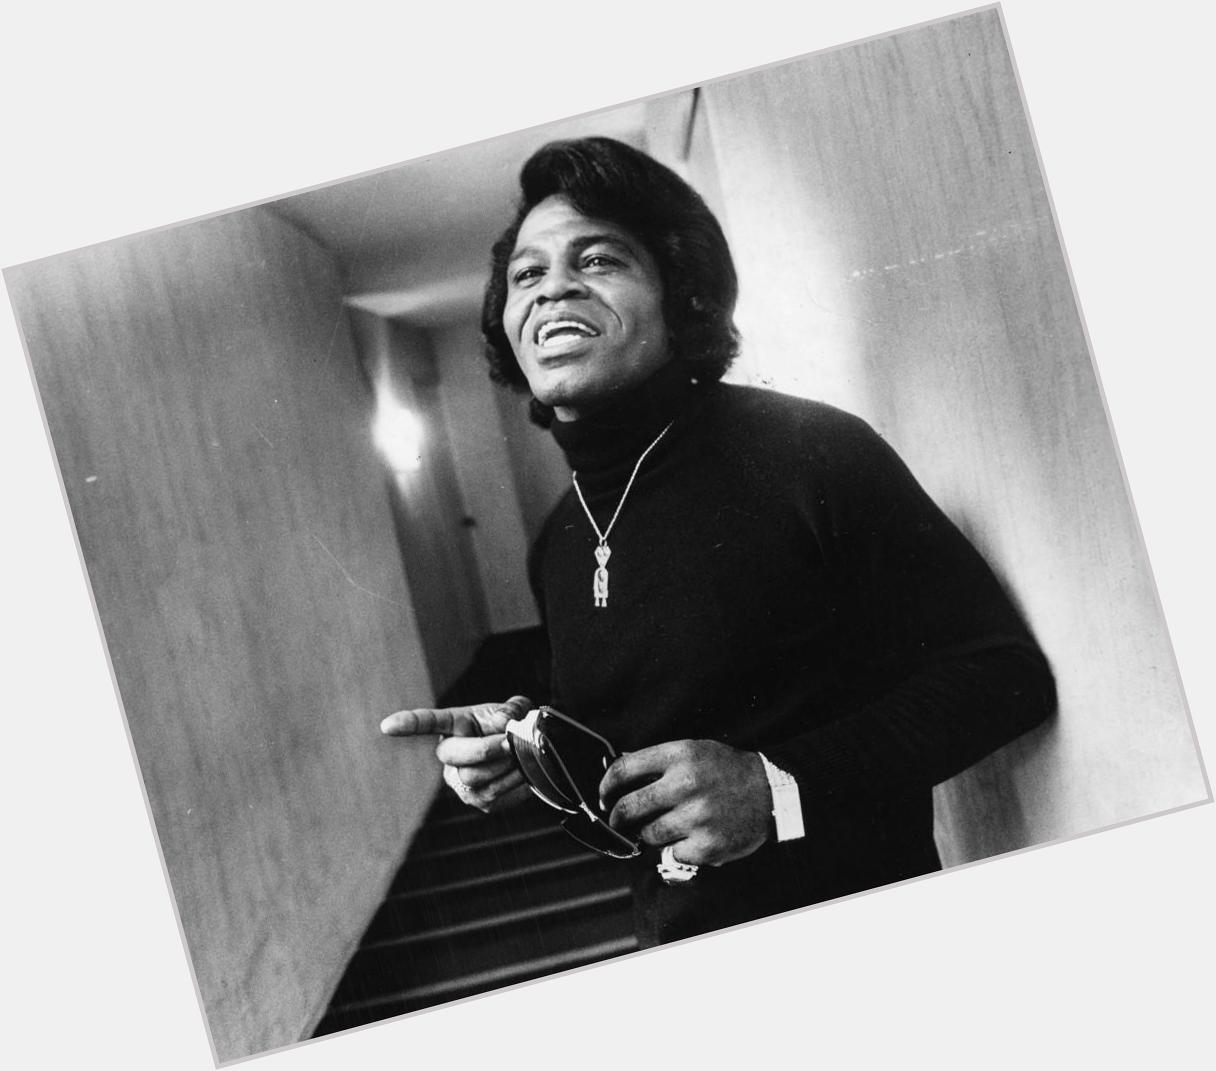 Happy birthday to the Godfather of Soul, Mr. Dynamite, Soul Brother The Man With The Crown... James Brown 